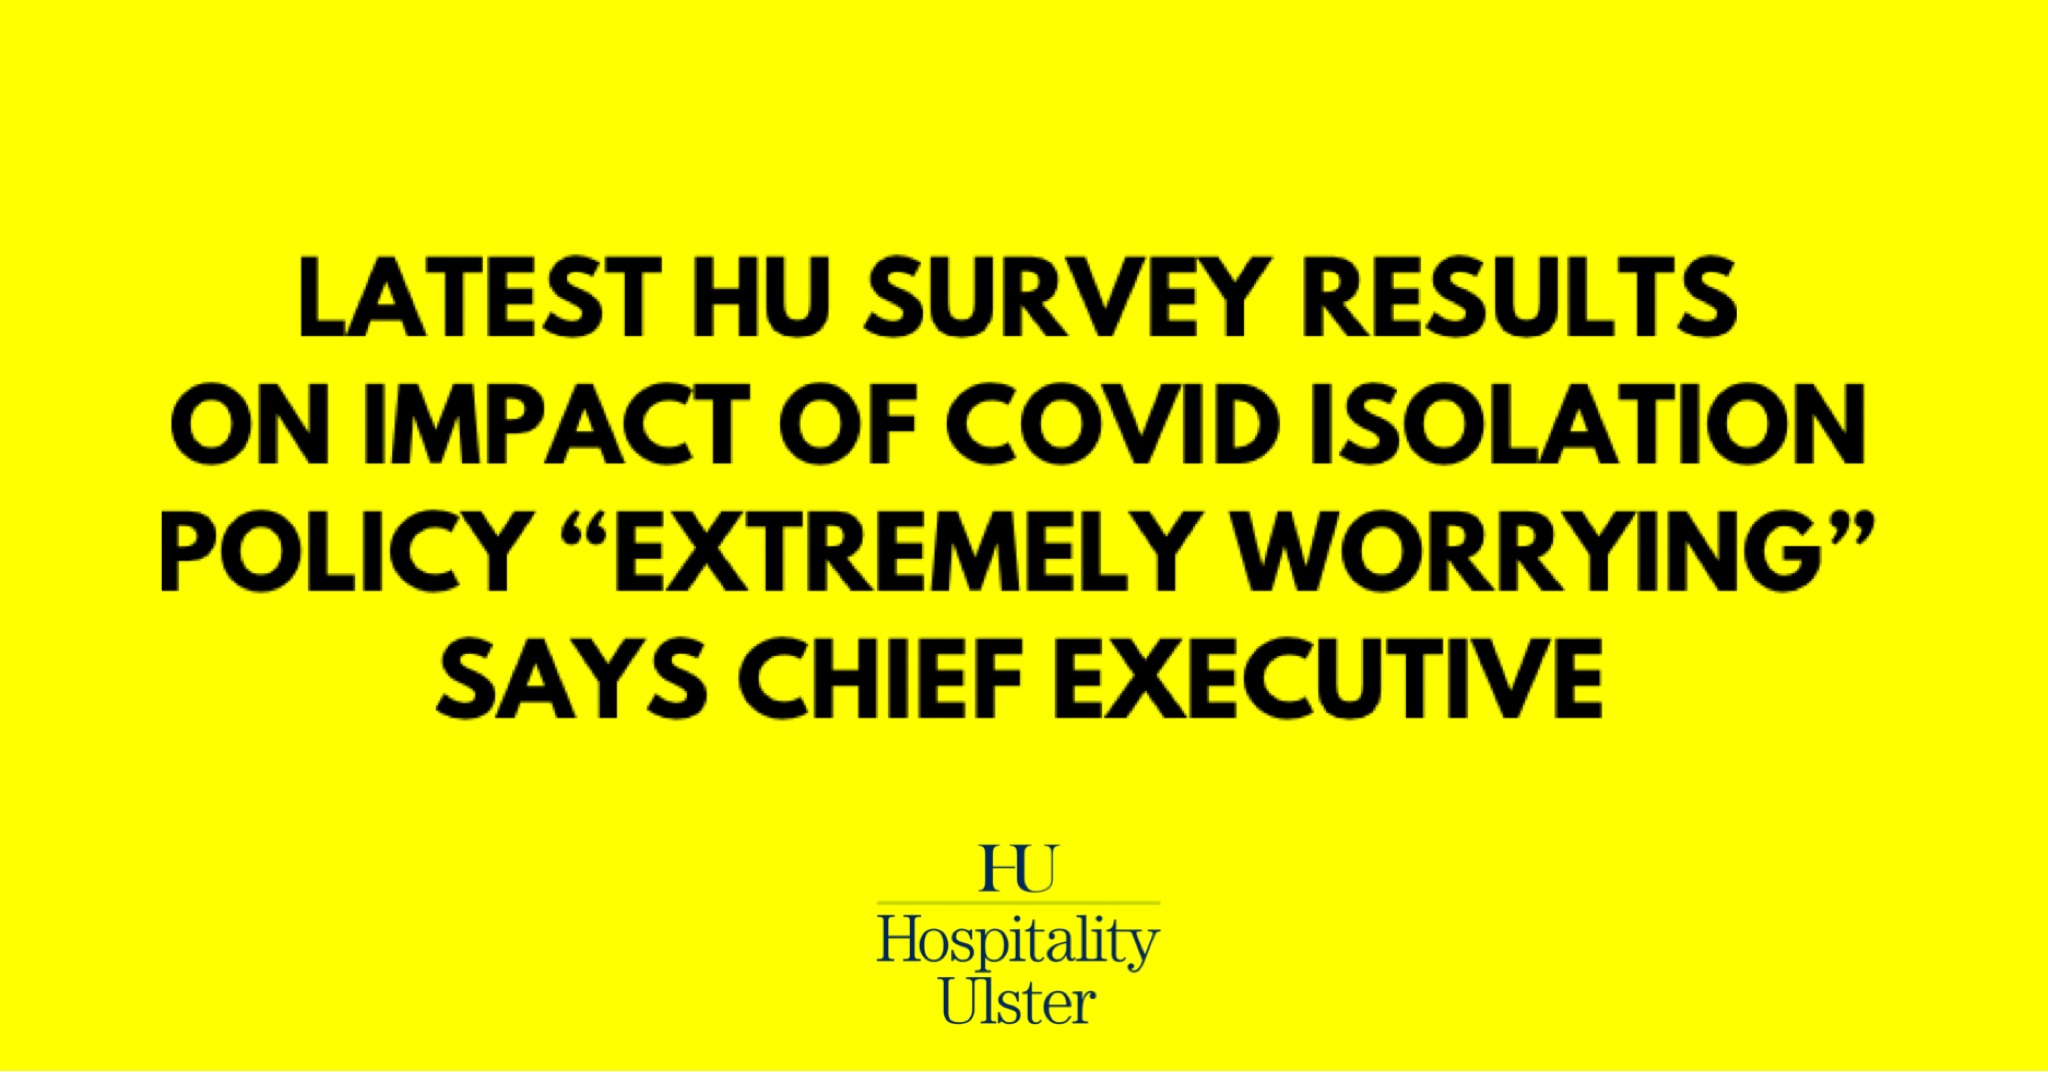 HU SURVEY RESULTS ON IMPACT OF COVID ISOLATION POLICY EXTREMELY WORRYING SAYS CEO